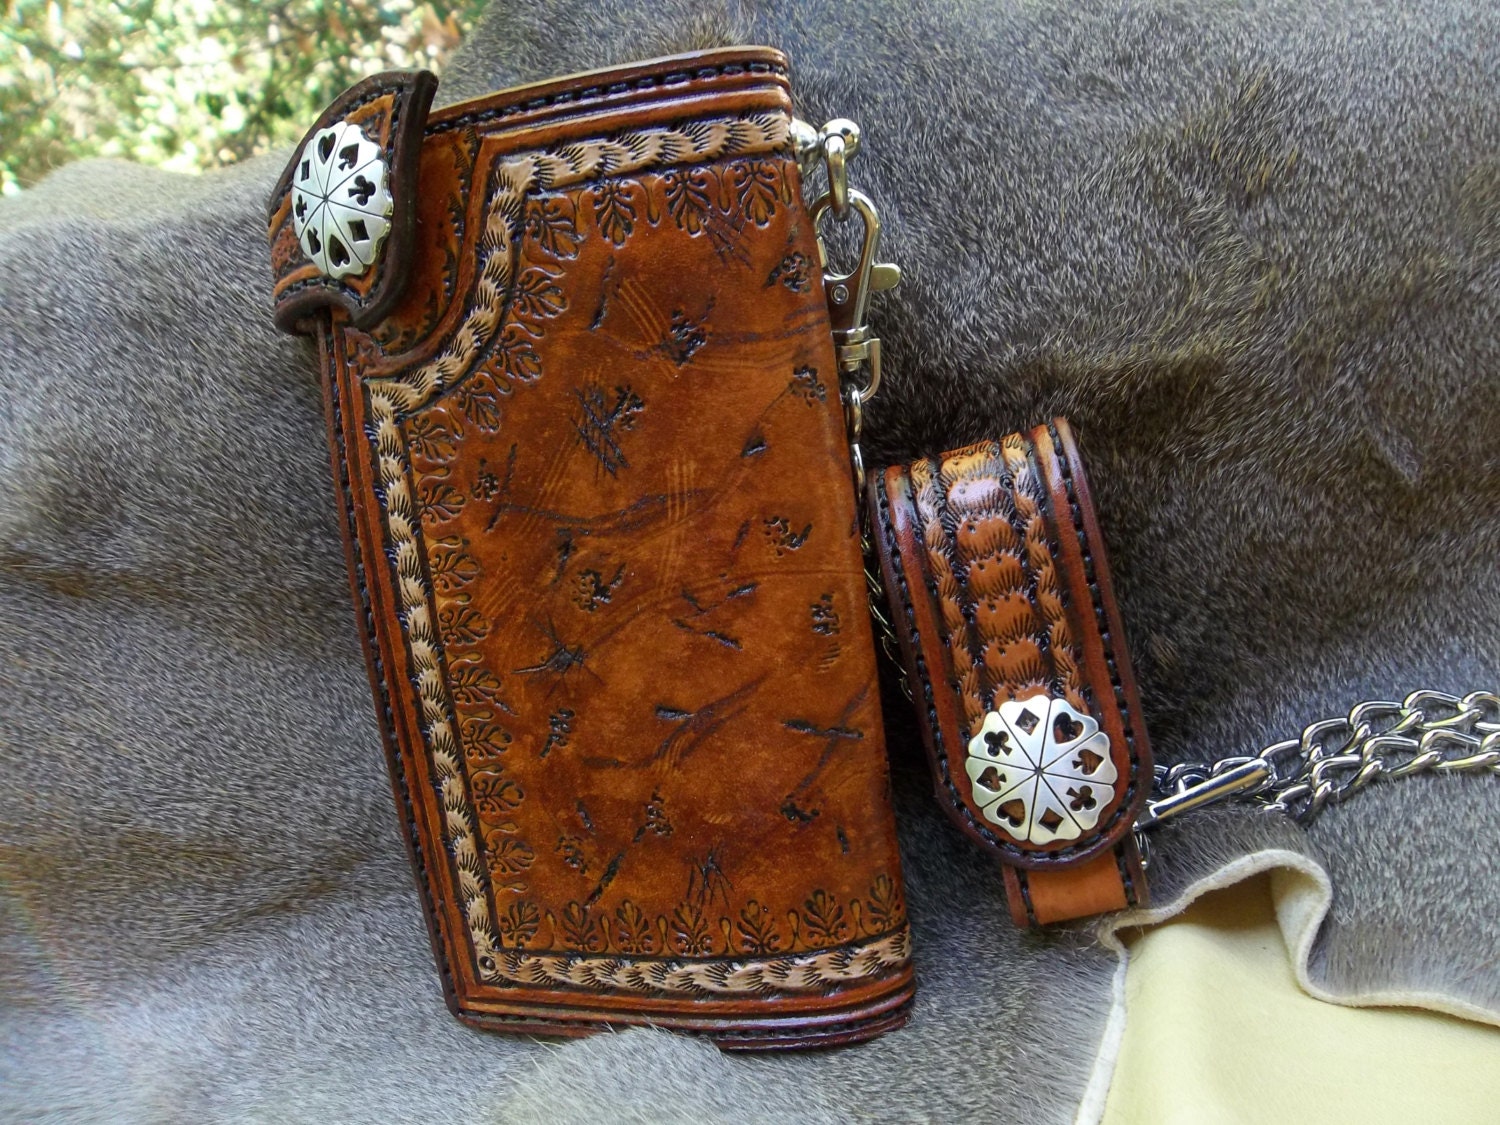 Chain Wallet Handmade Handtooled Leather Western Swag was